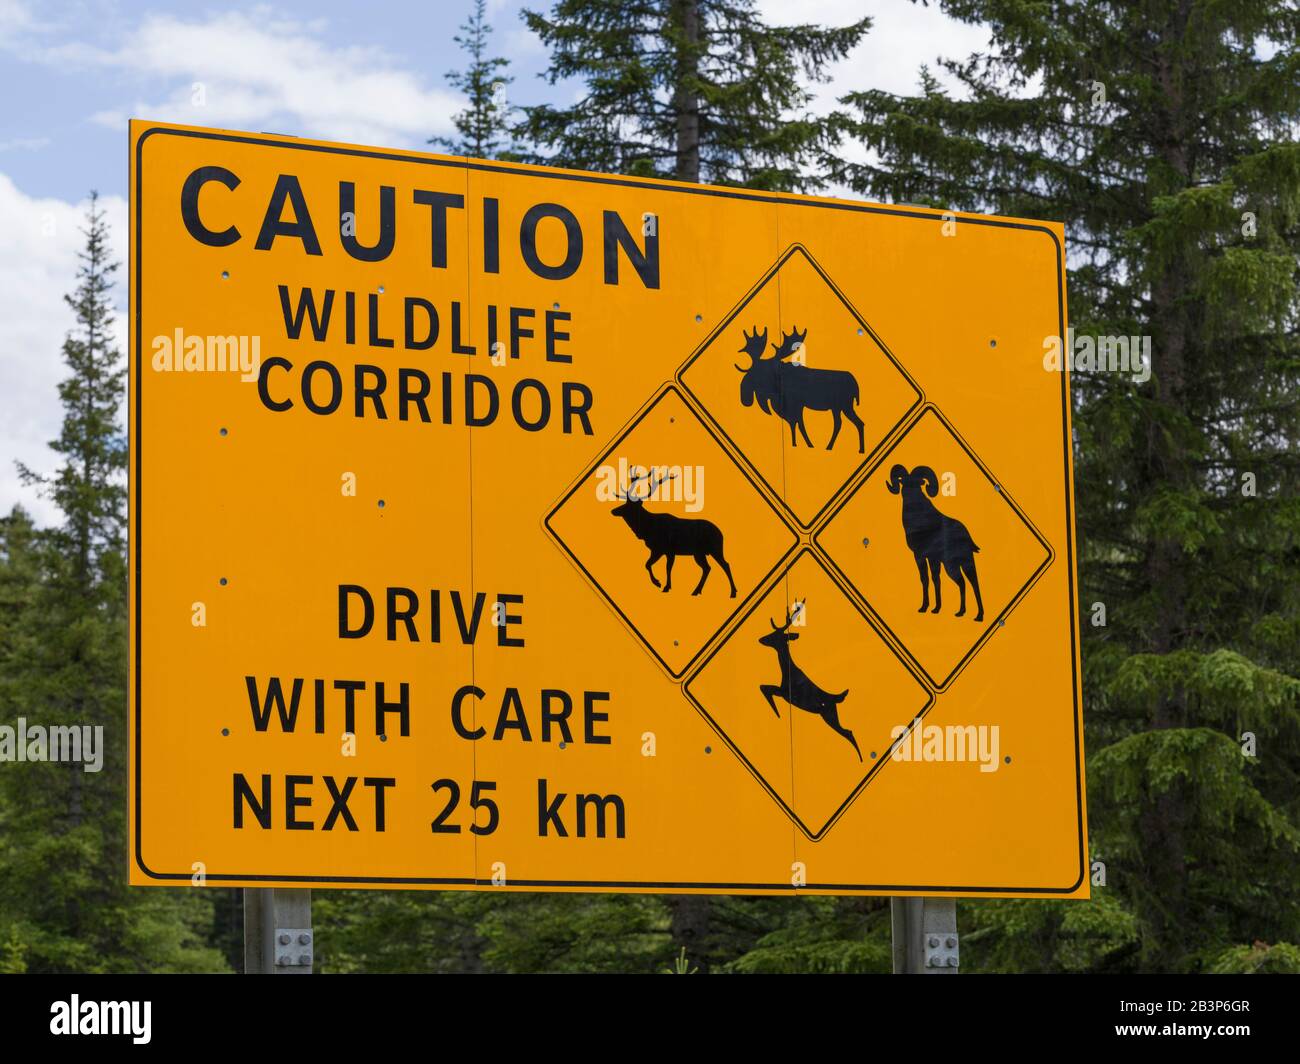 Caution Wildlife Signboard in a forest, Alberta, Canada Stock Photo